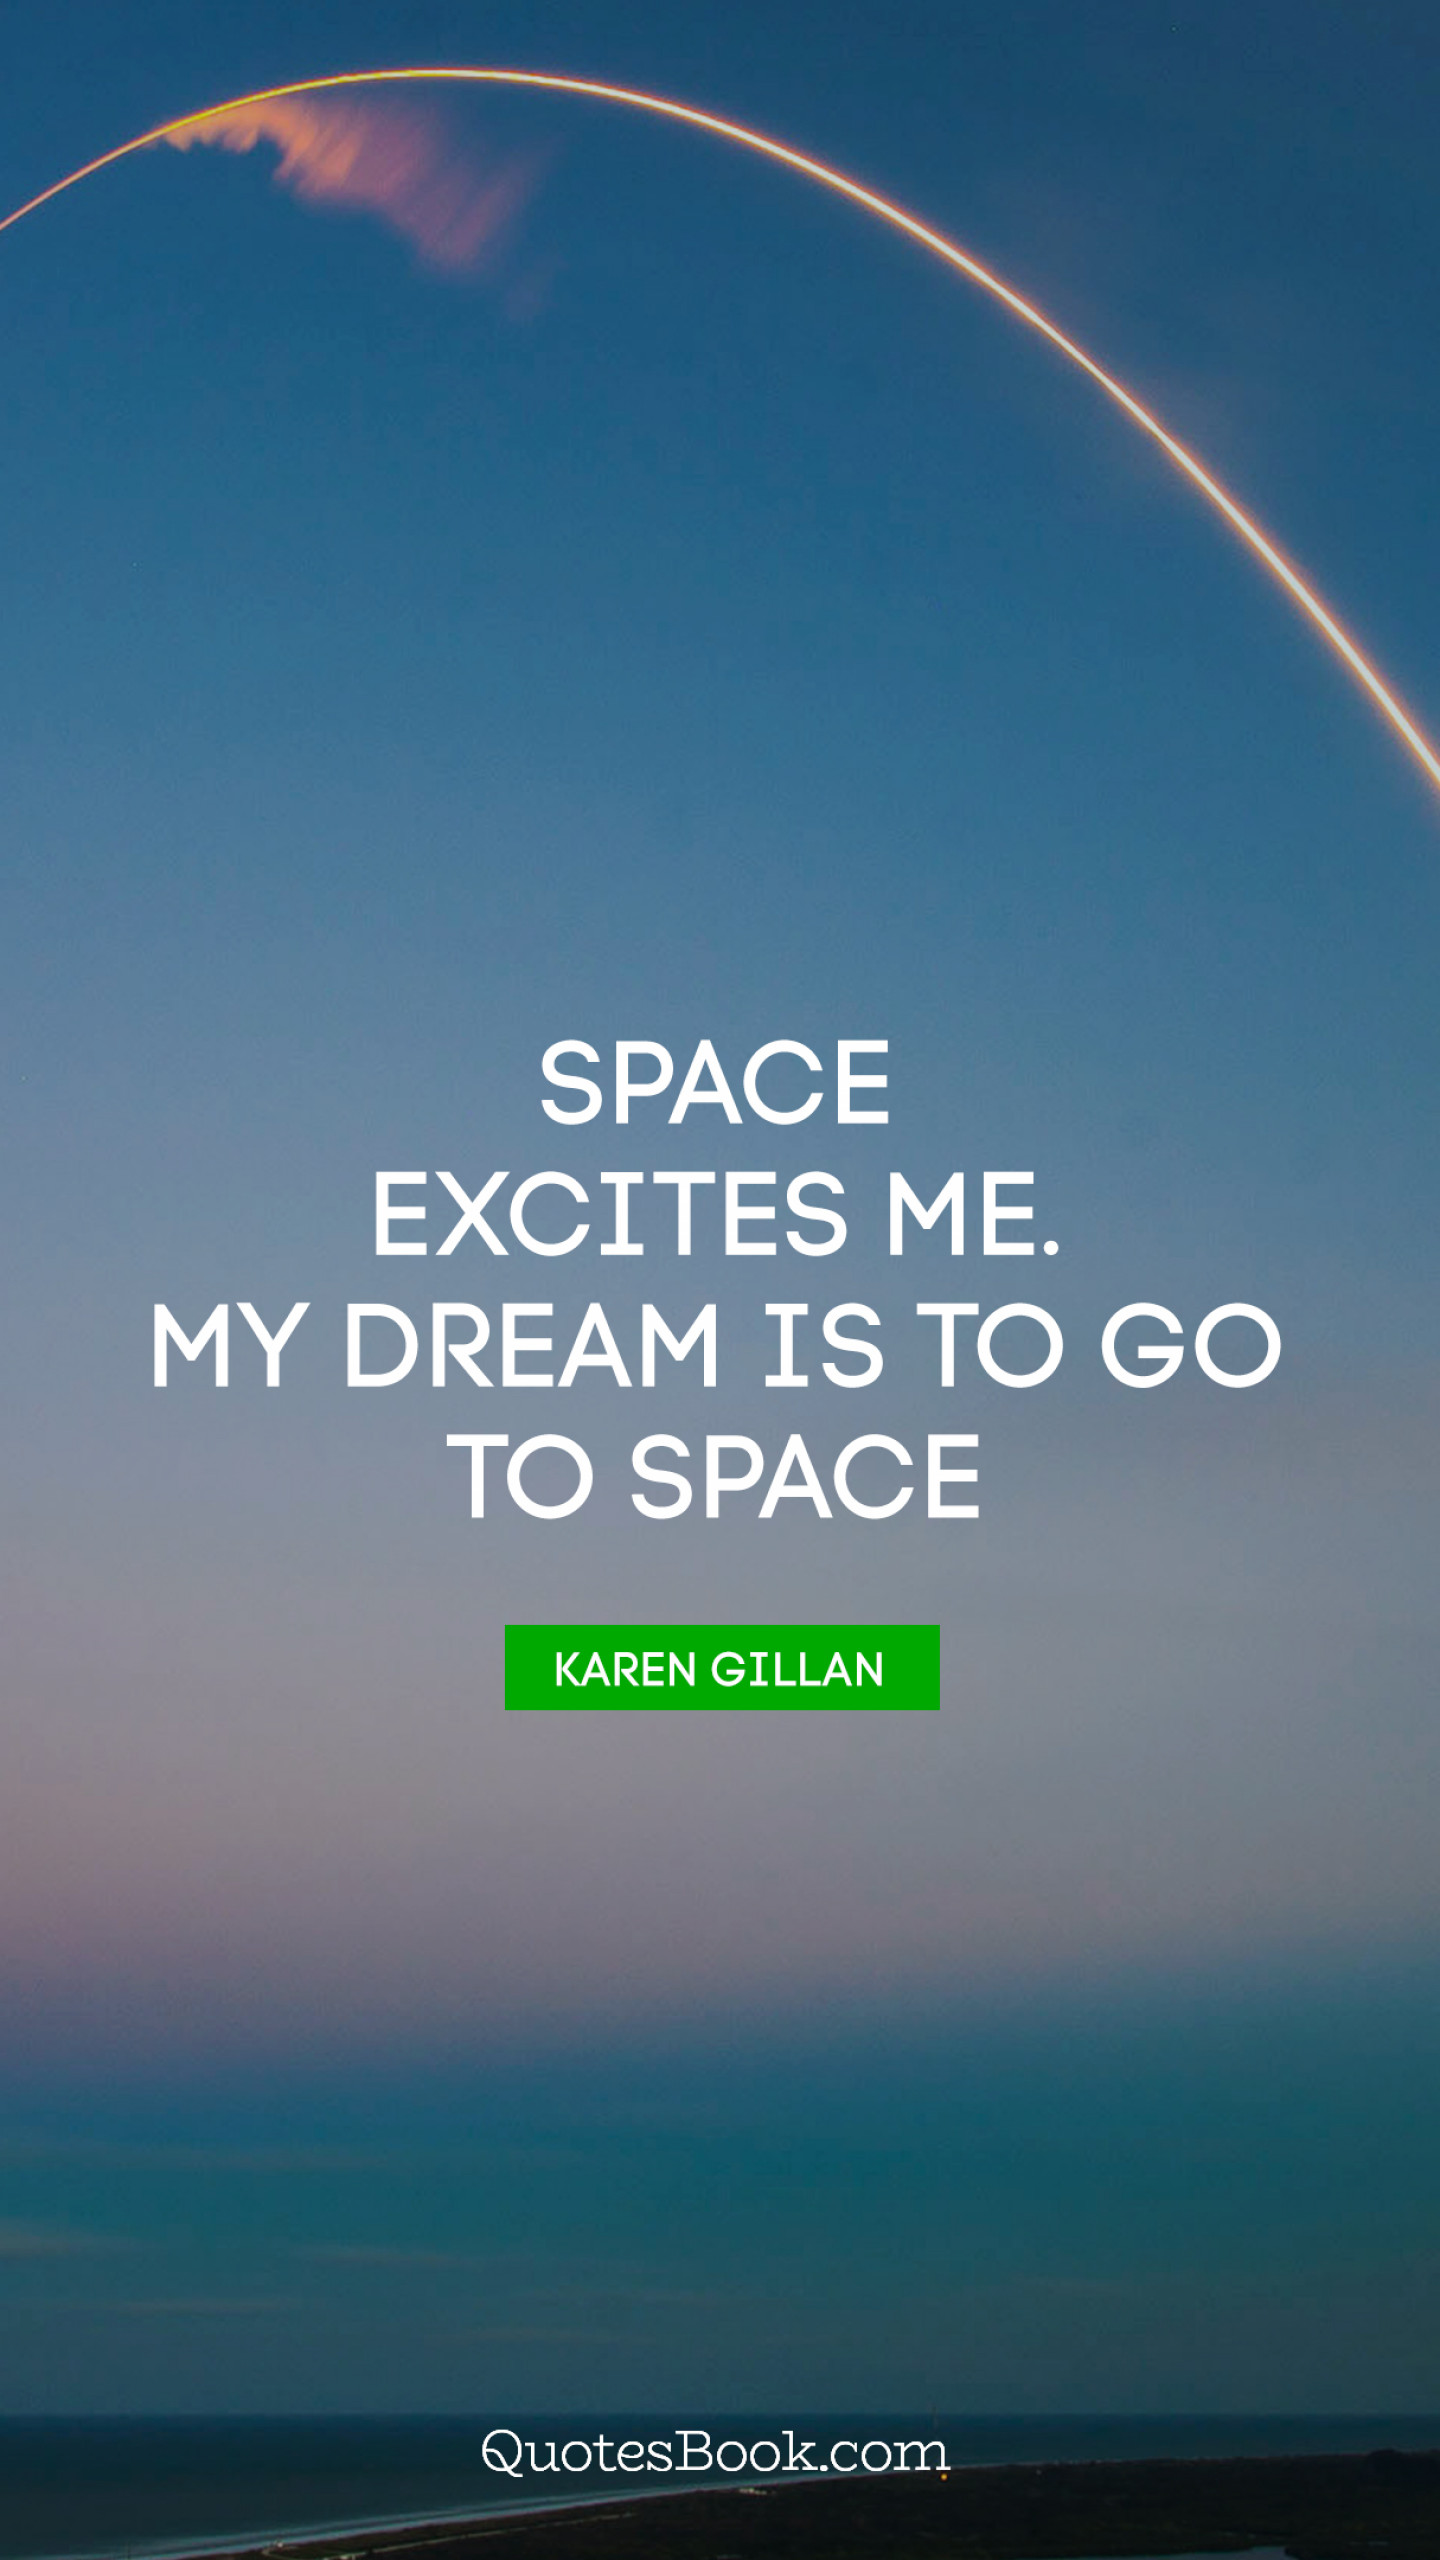 Space excites me. My dream is to go to space. - Quote by Karen Gillan